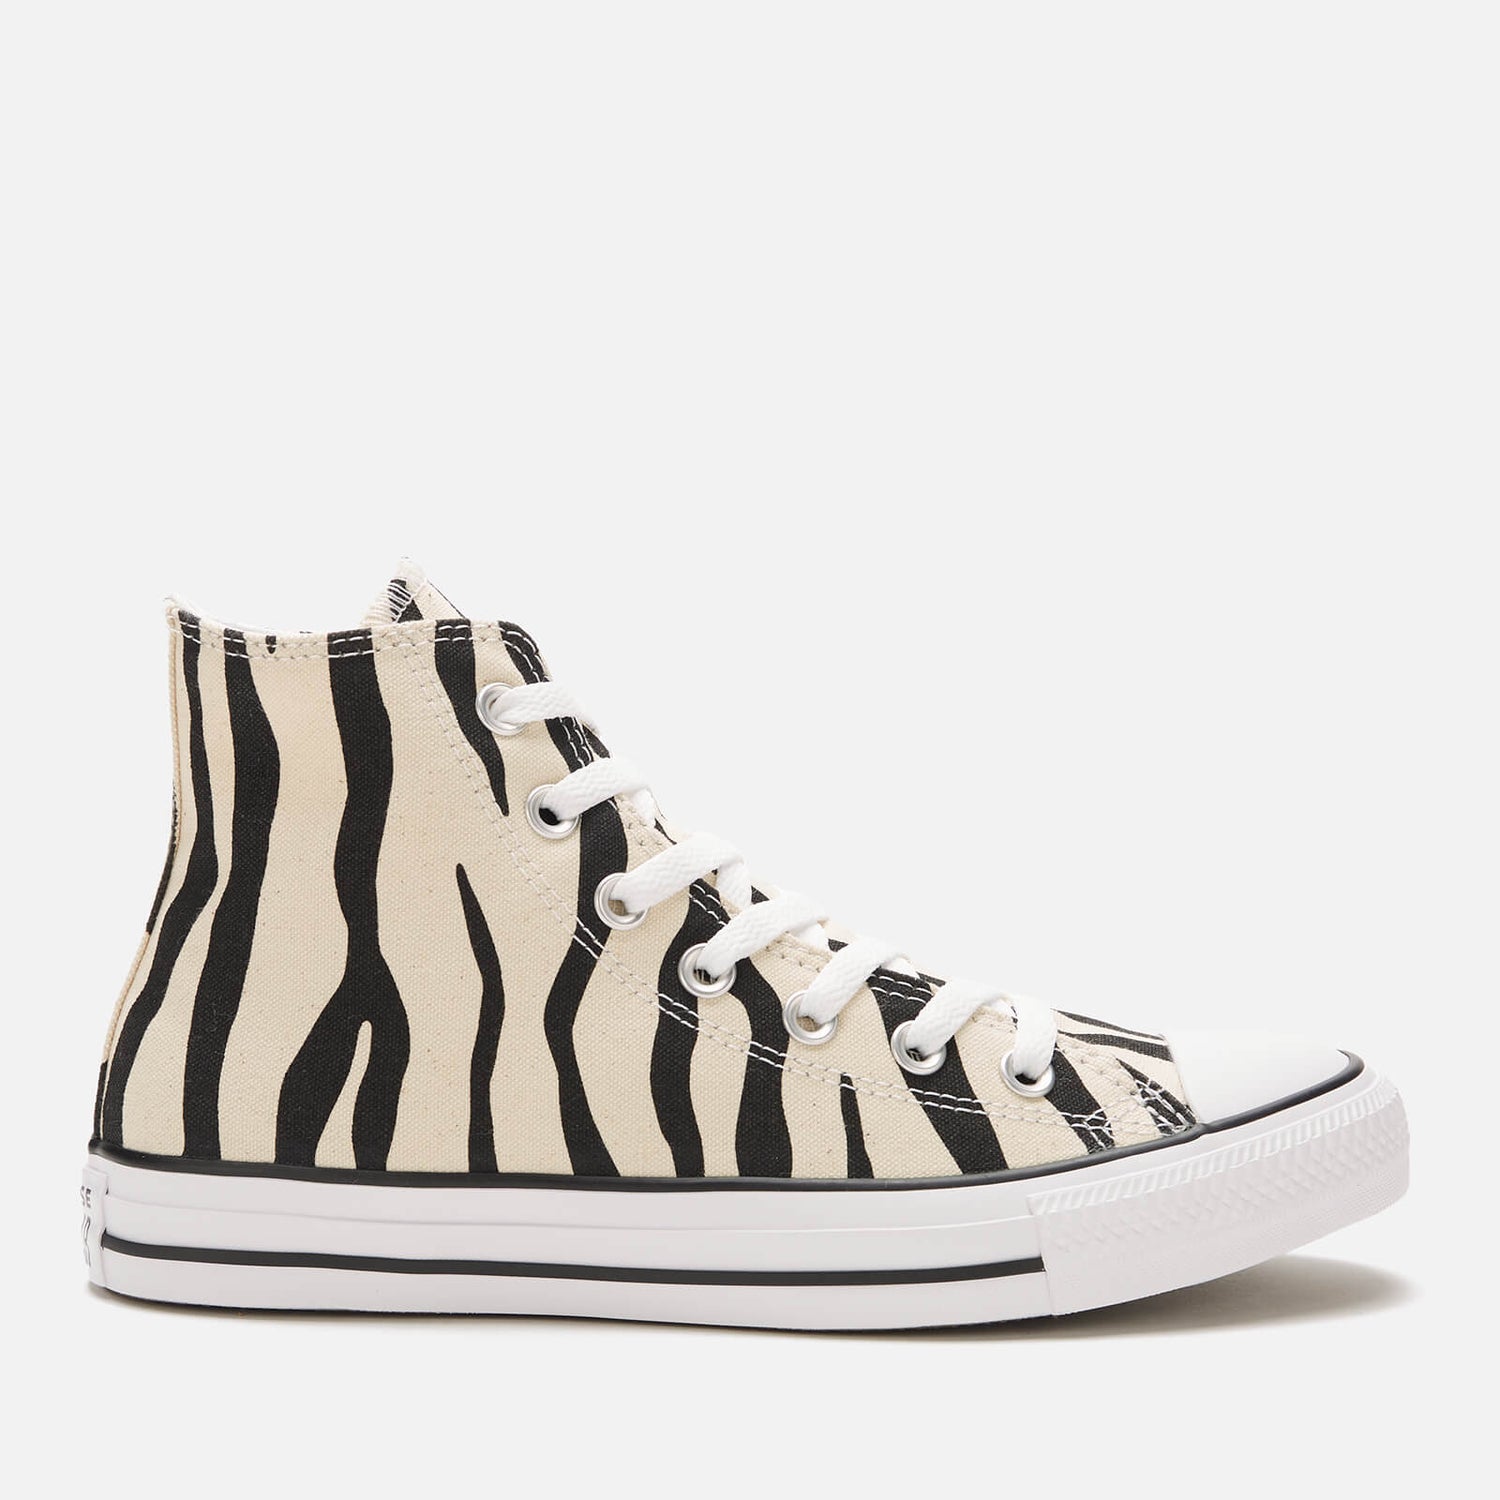 Converse Chuck Taylor All Star Canvas Archive Zebra Hi-Top Trainers - Black/Greige/White - UK 3